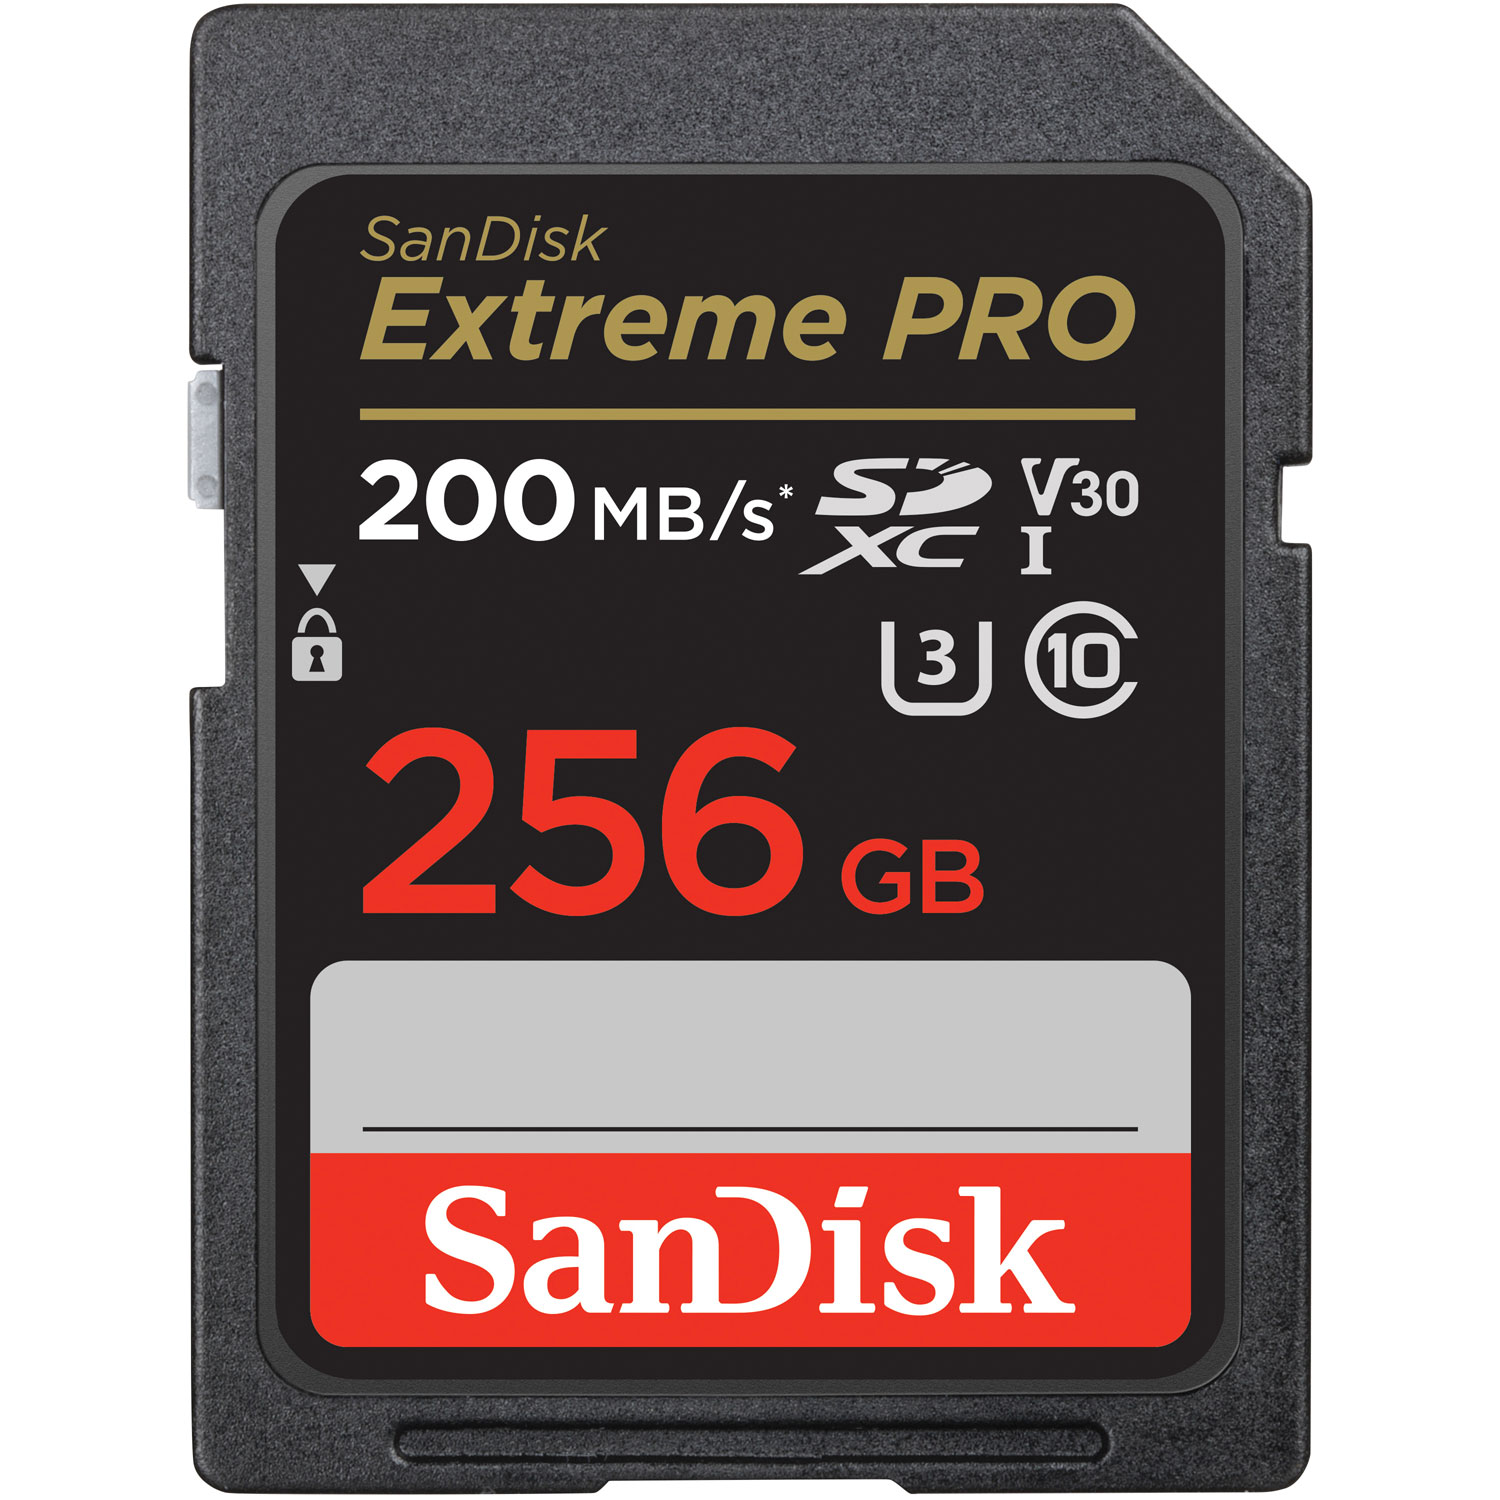 SanDisk Extreme Pro 256GB 200MB/s SDXC Memory Card